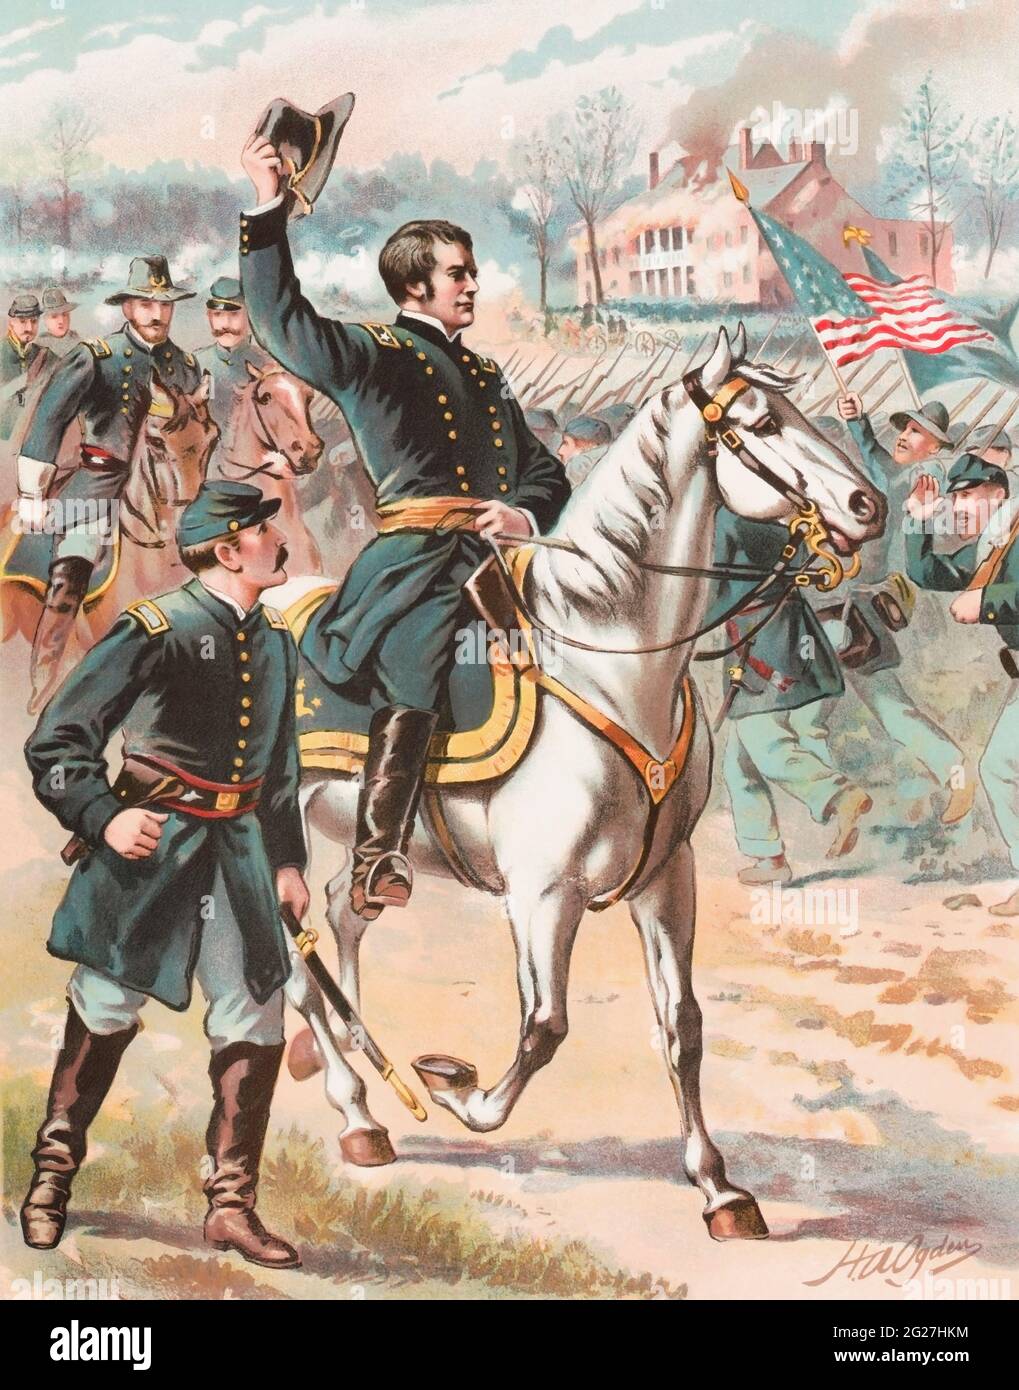 General Joseph Hooker riding on a horse and waving at his troops. Stock Photo